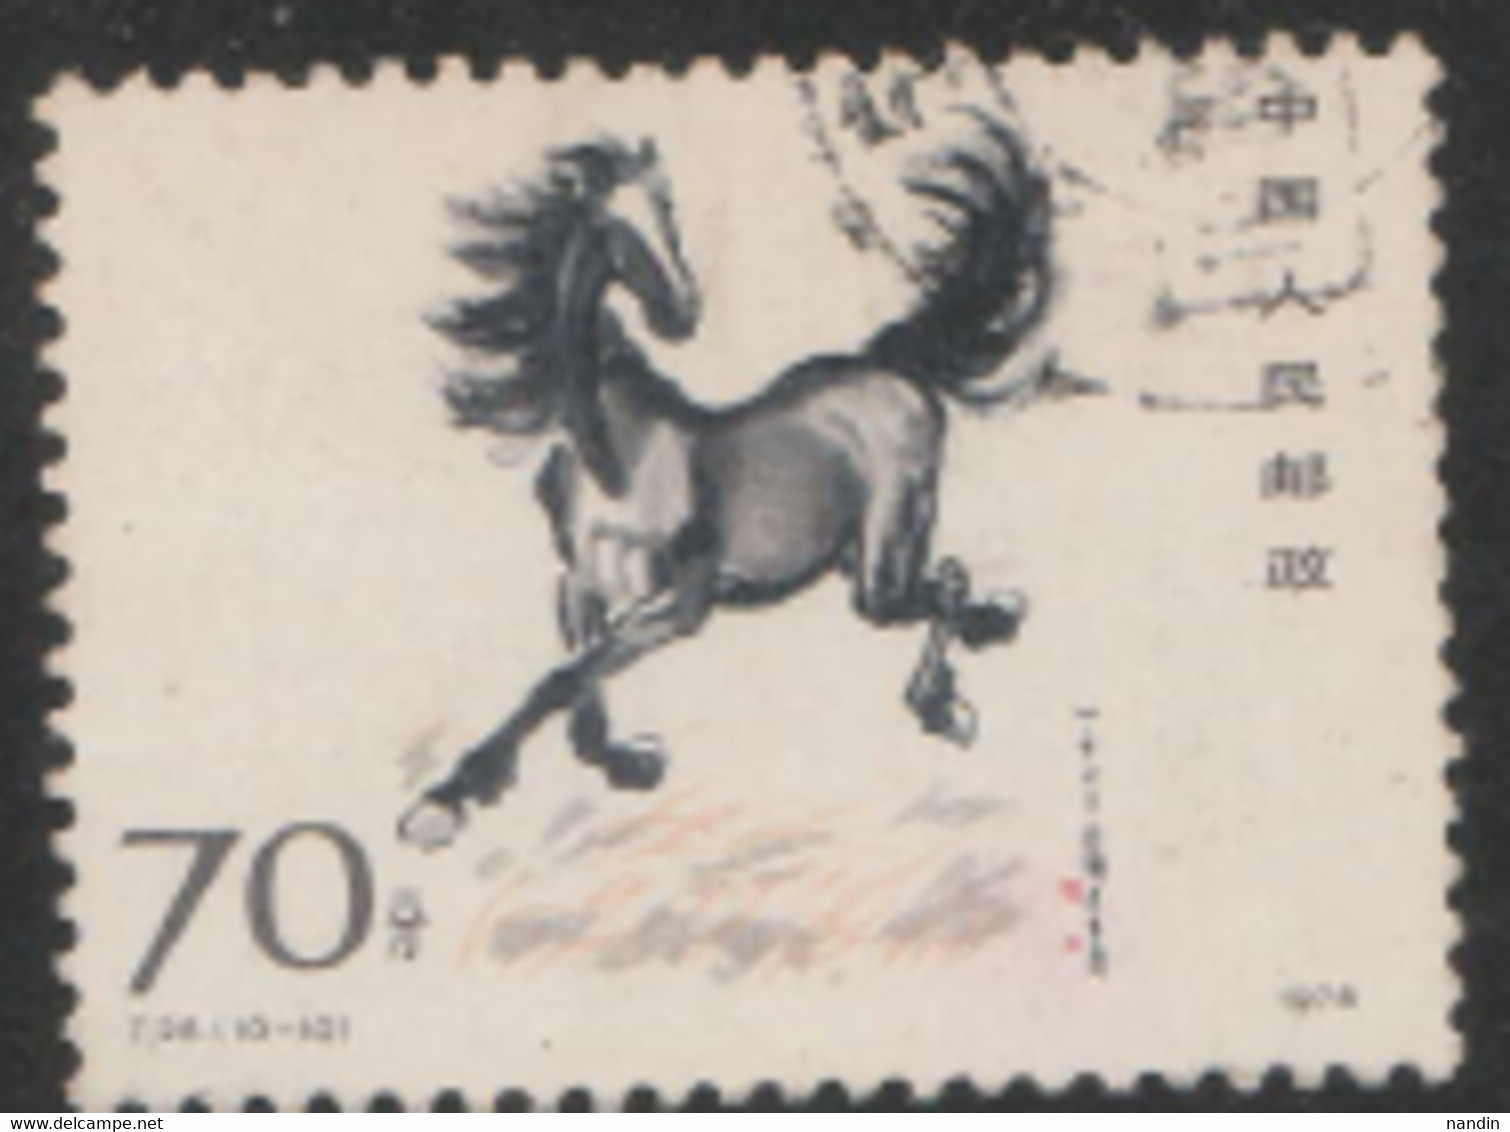 USED STAMP From CHINA 1978 Stamp  On   Galloping Horses - Used Stamps